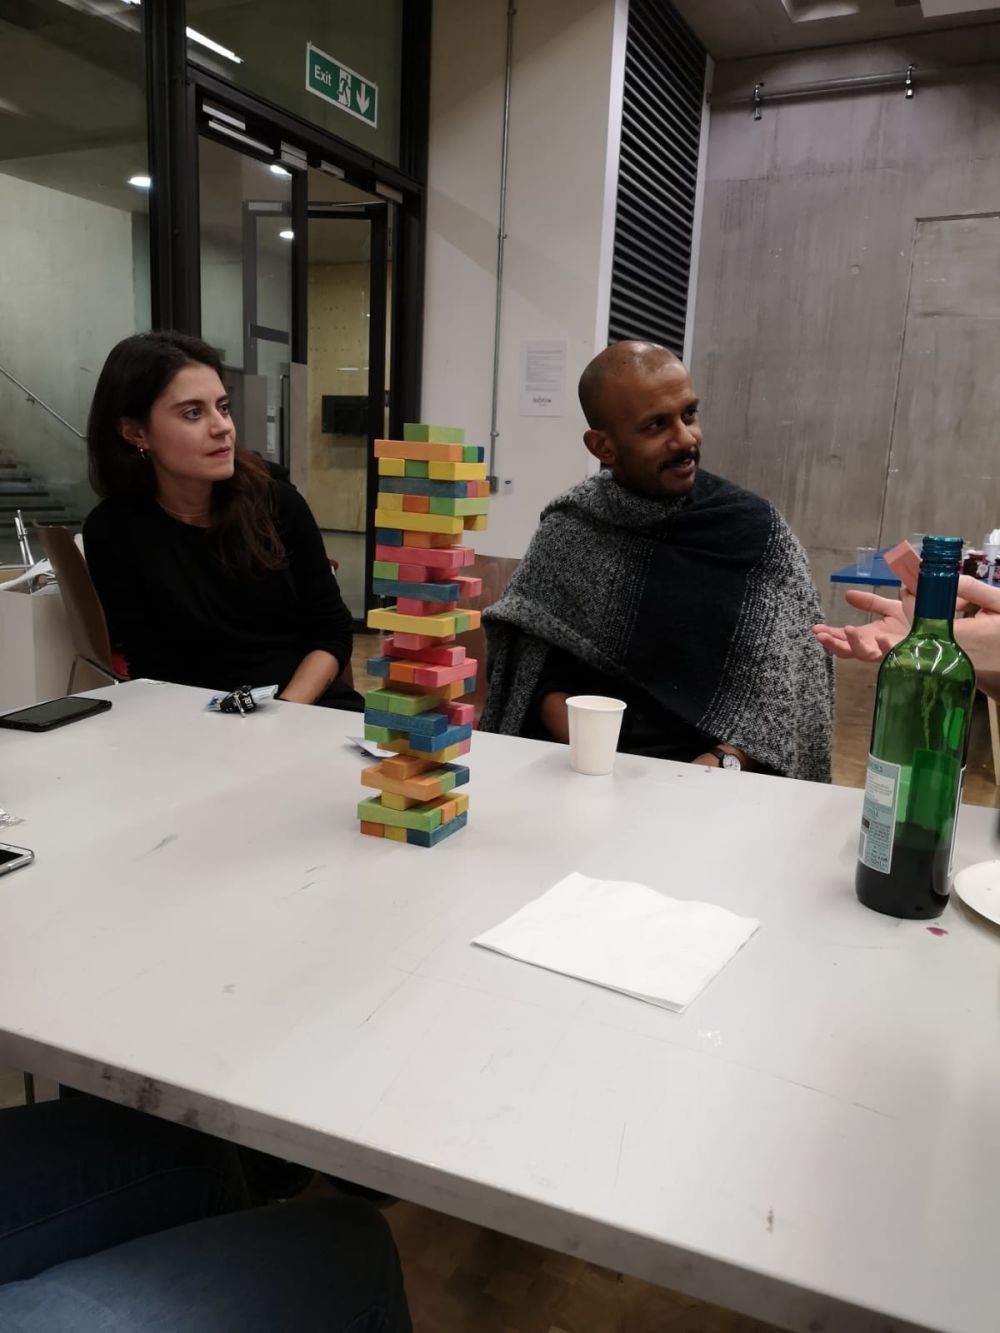 People sitting with coloured blocks on table